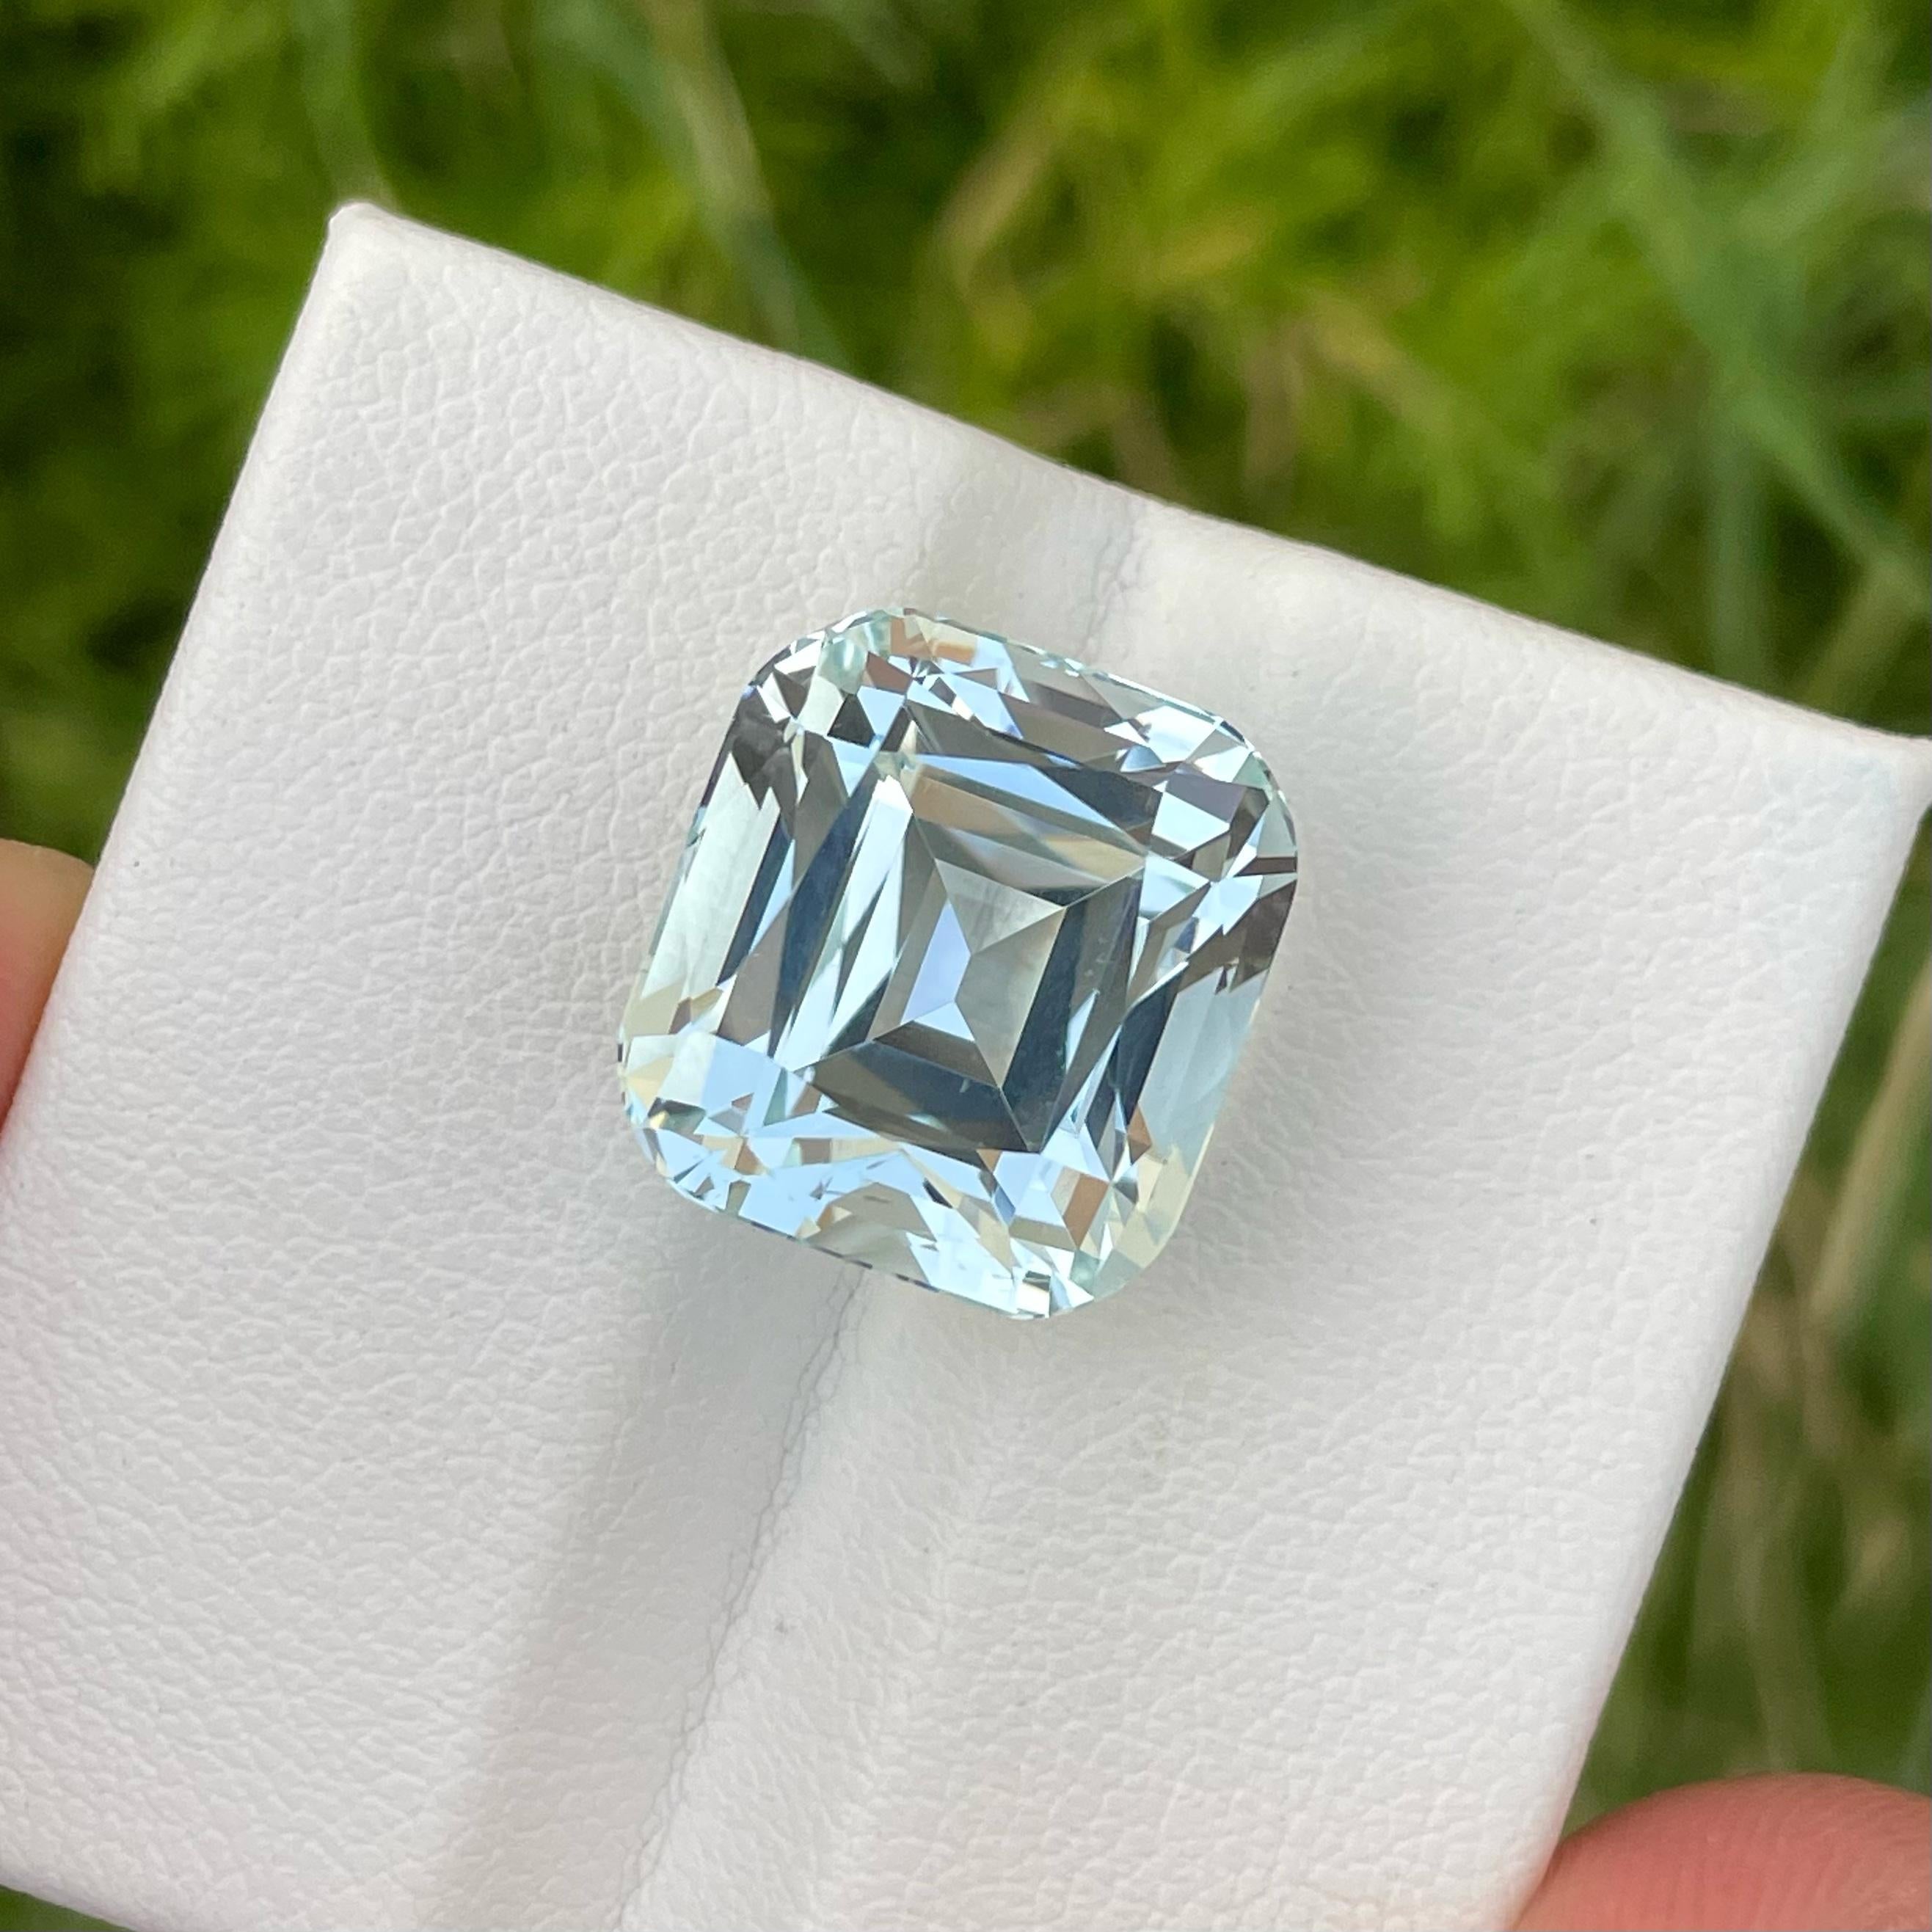 Weight 17.15 carats 
Dimensions 15.0 x 13.9 x 12.0 mm
Treatment none 
Origin Pakistan 
Clarity Loupe clean 
Shape cushion
Cut fancy cushion 

Indulge in the mesmerizing beauty of the Aquamarine gemstone and let its tranquil energy wash over you.